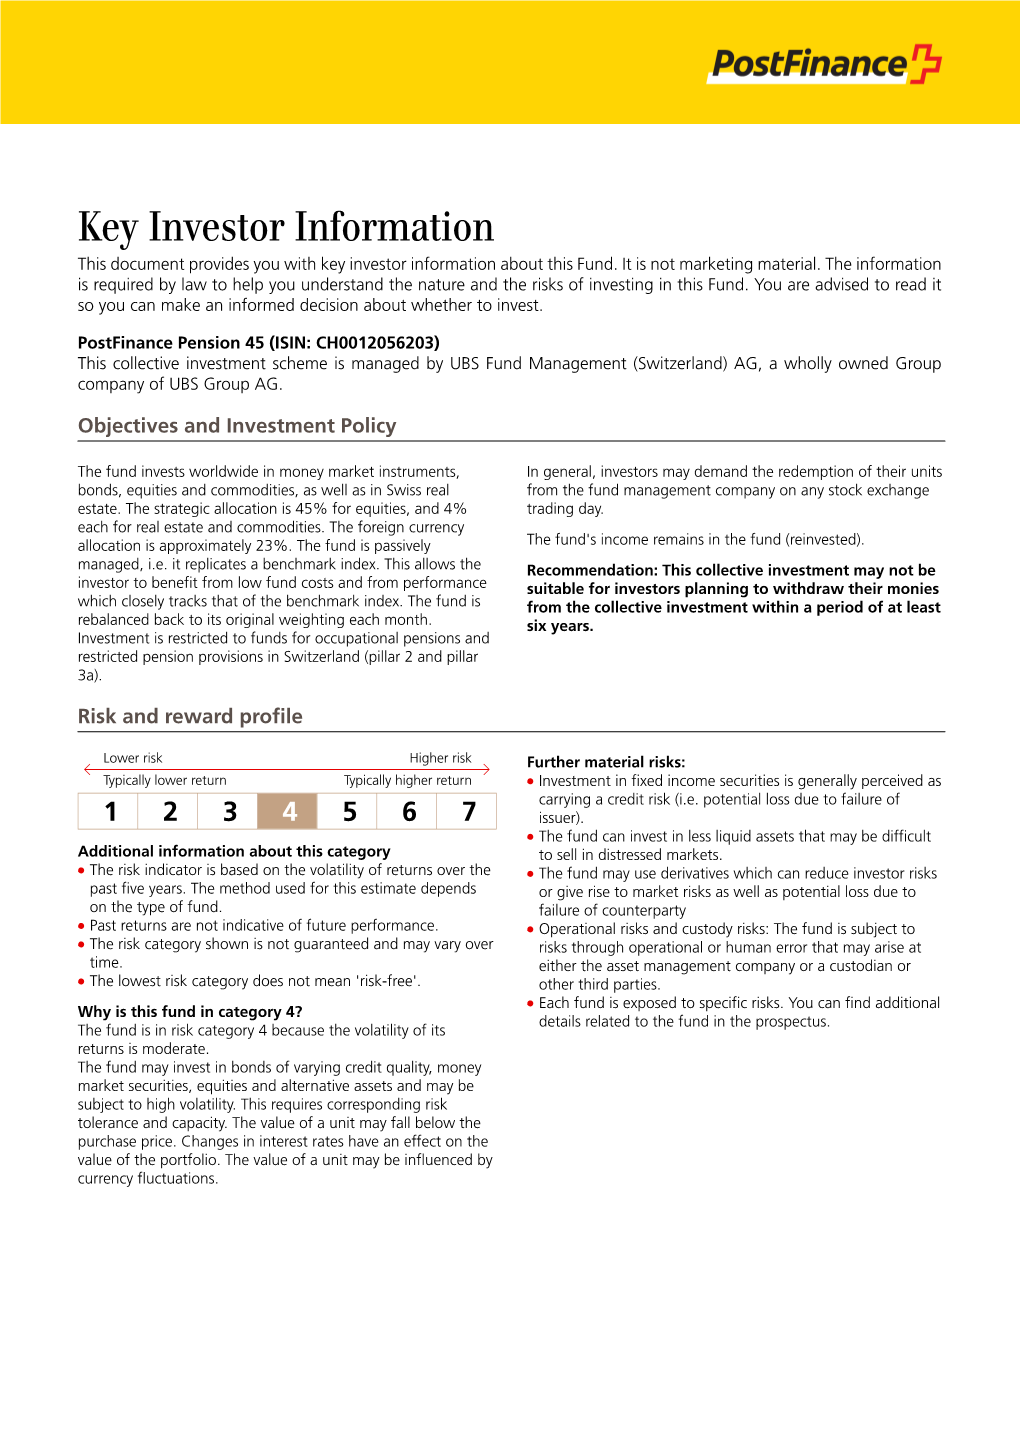 Key Investor Information This Document Provides You with Key Investor Information About This Fund